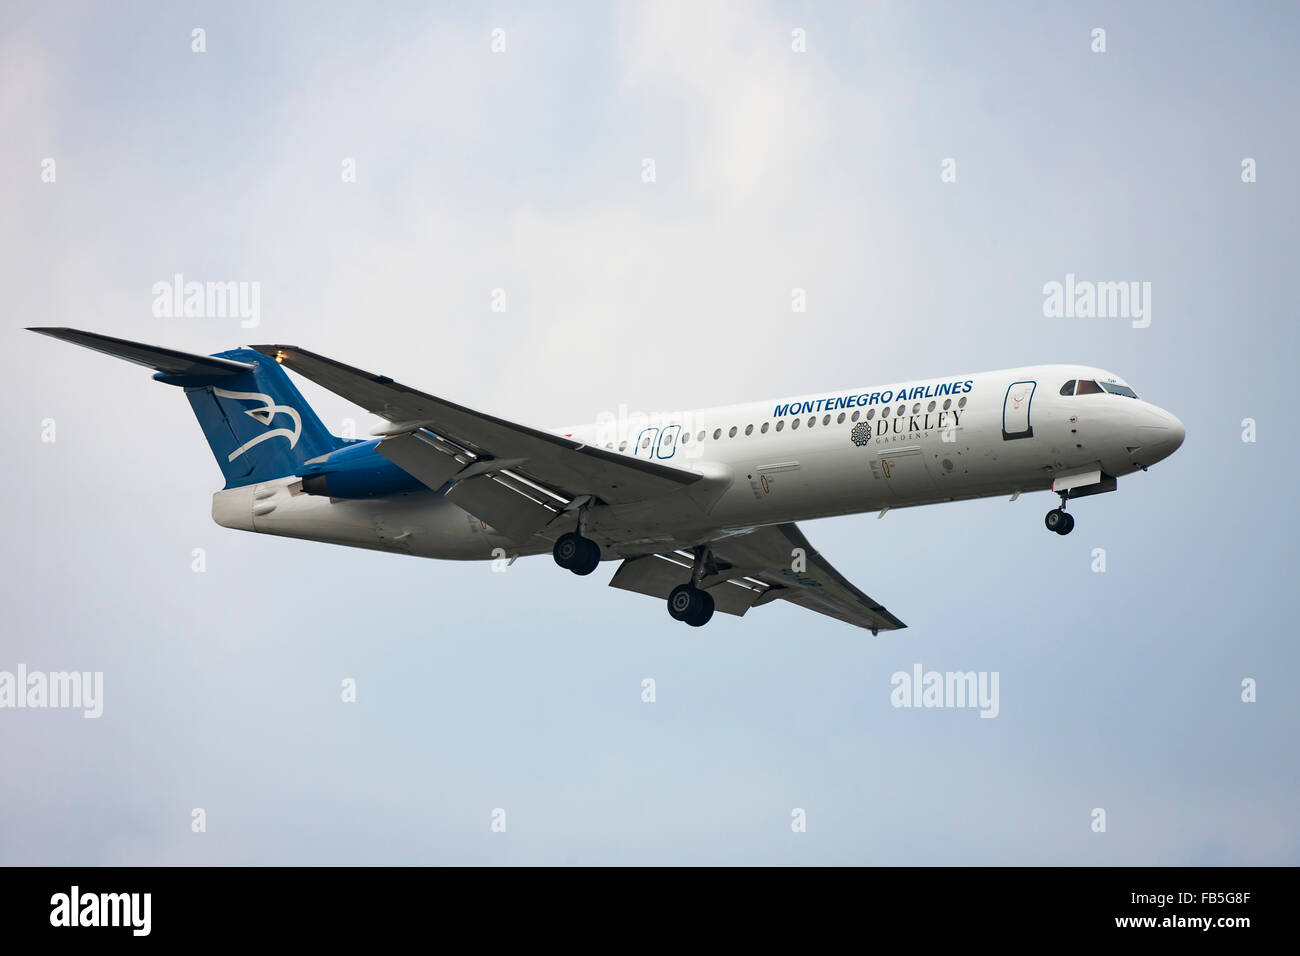 Montenegro Airlines Airliner Stock Photo